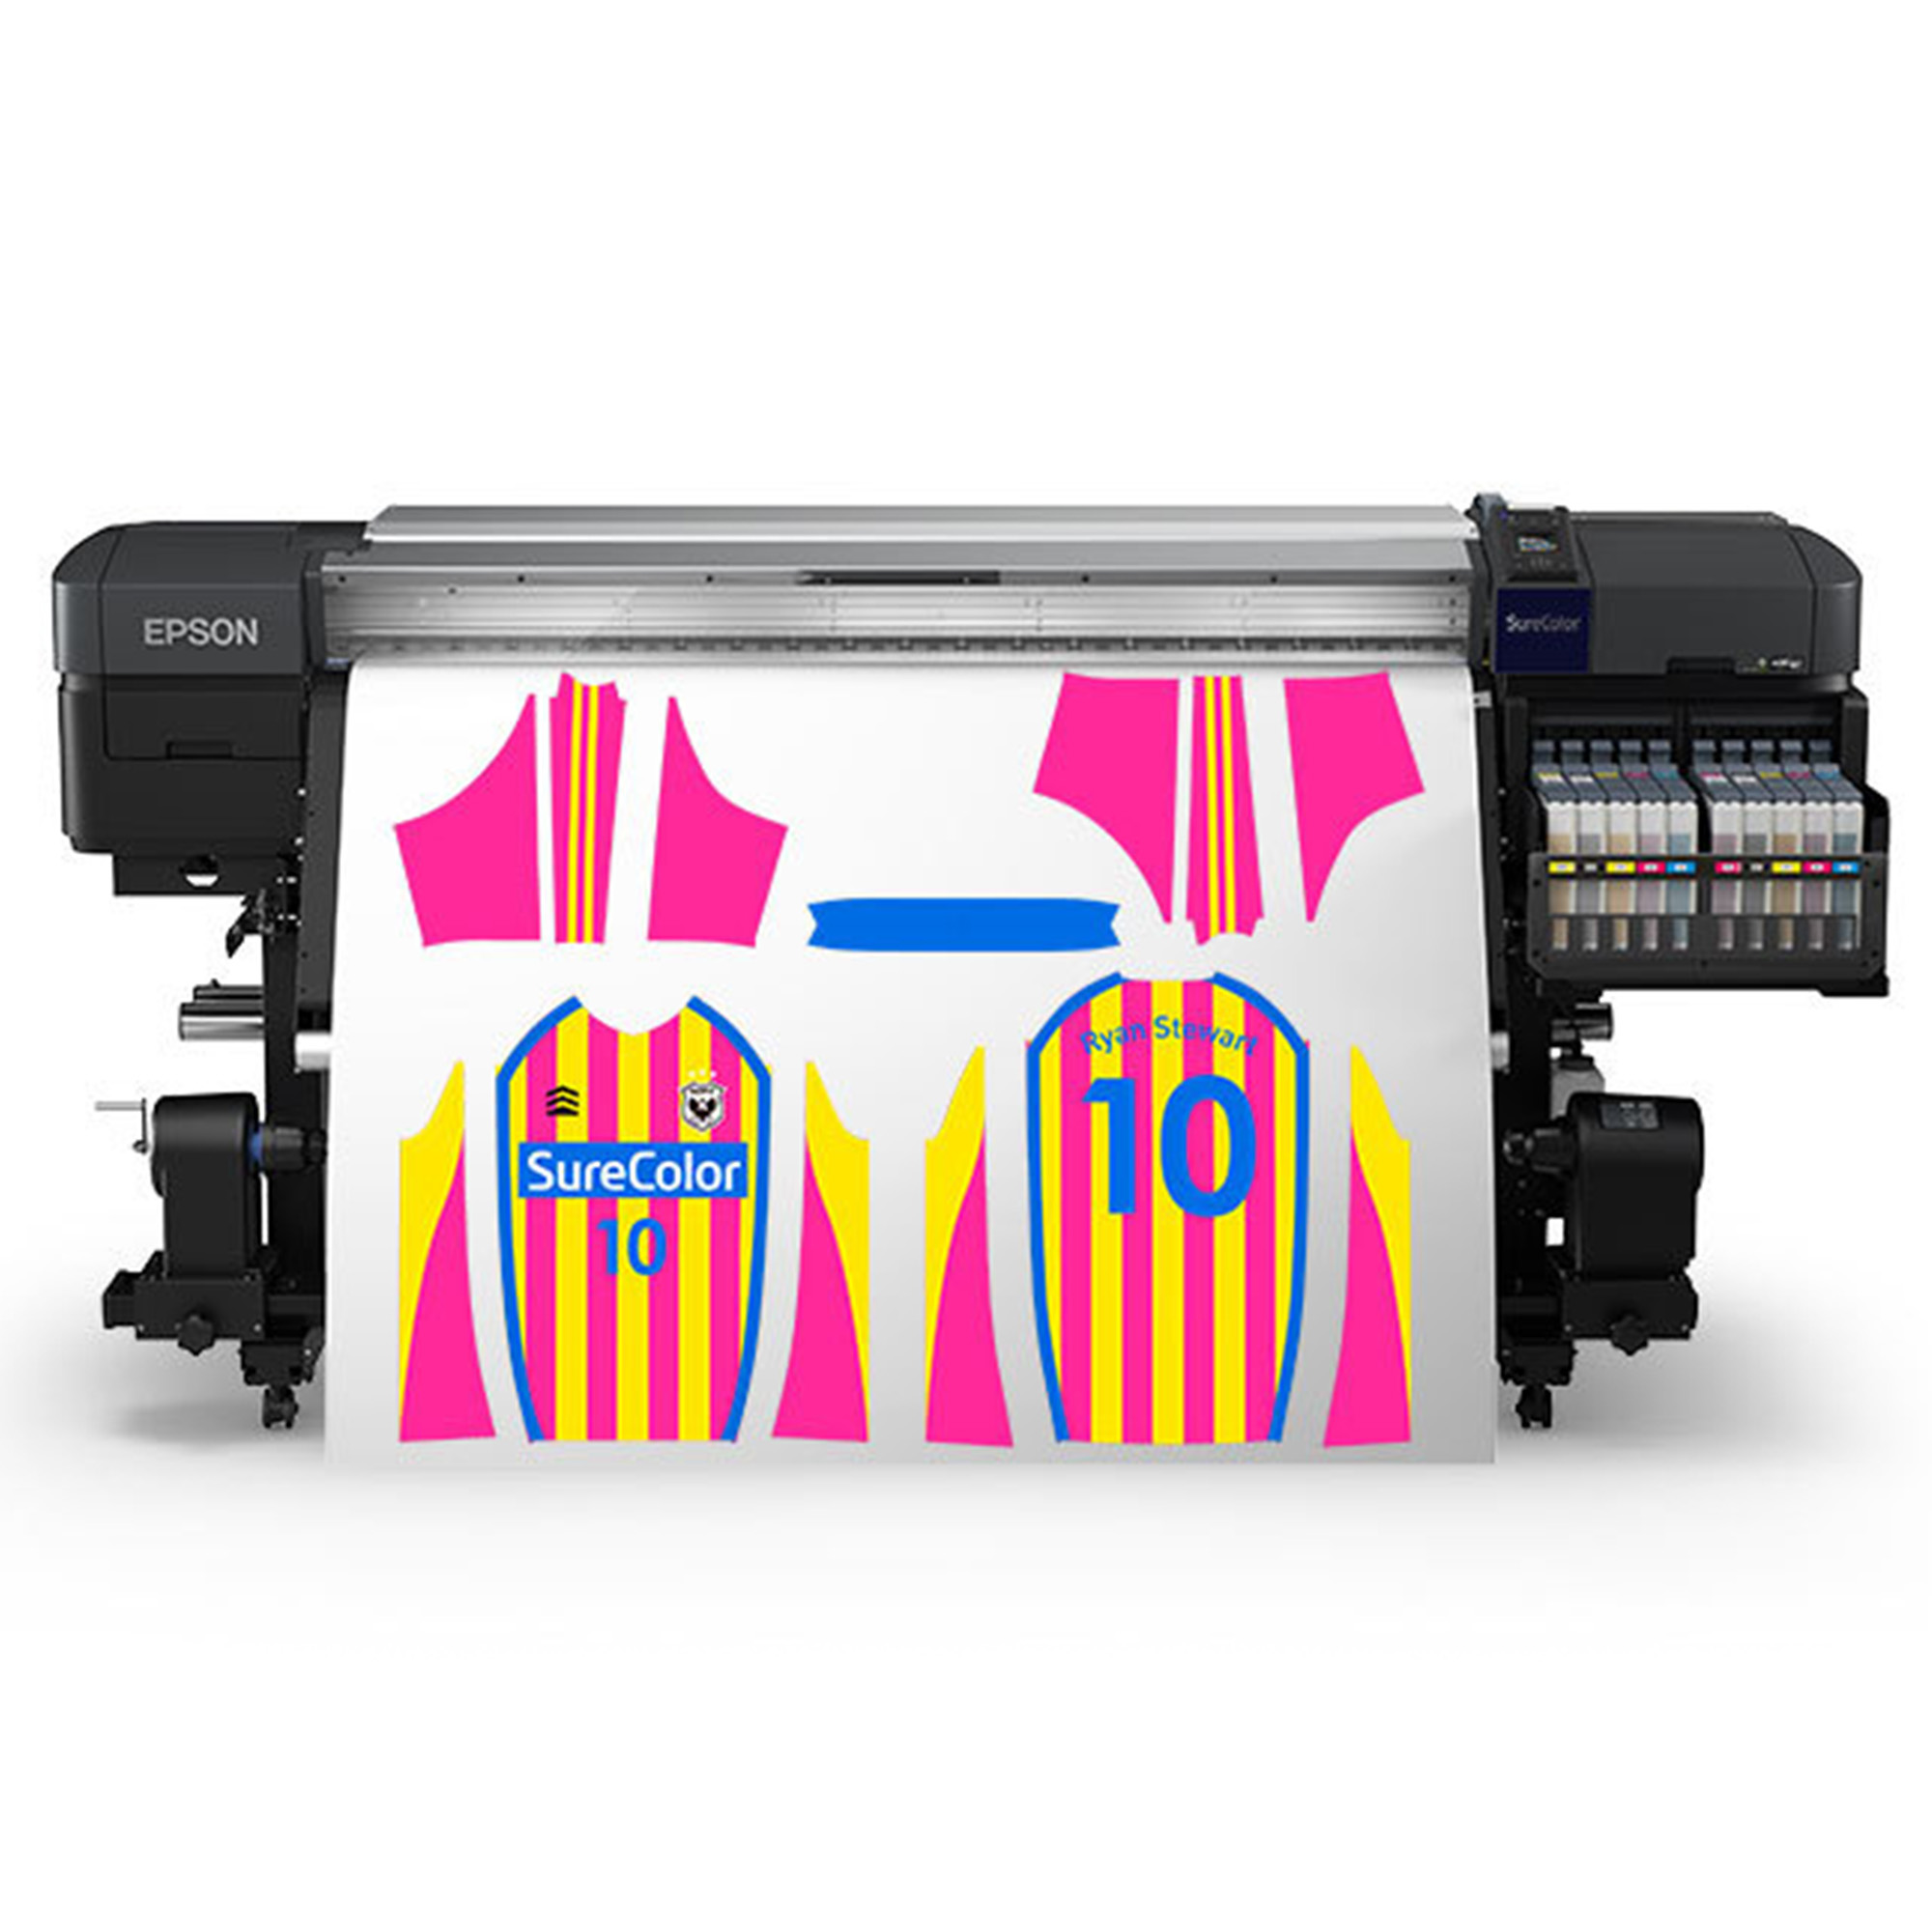 Epson® SureColor F9470 64" Production Edition Sublimation Printer - High Visibility - w/ Stand